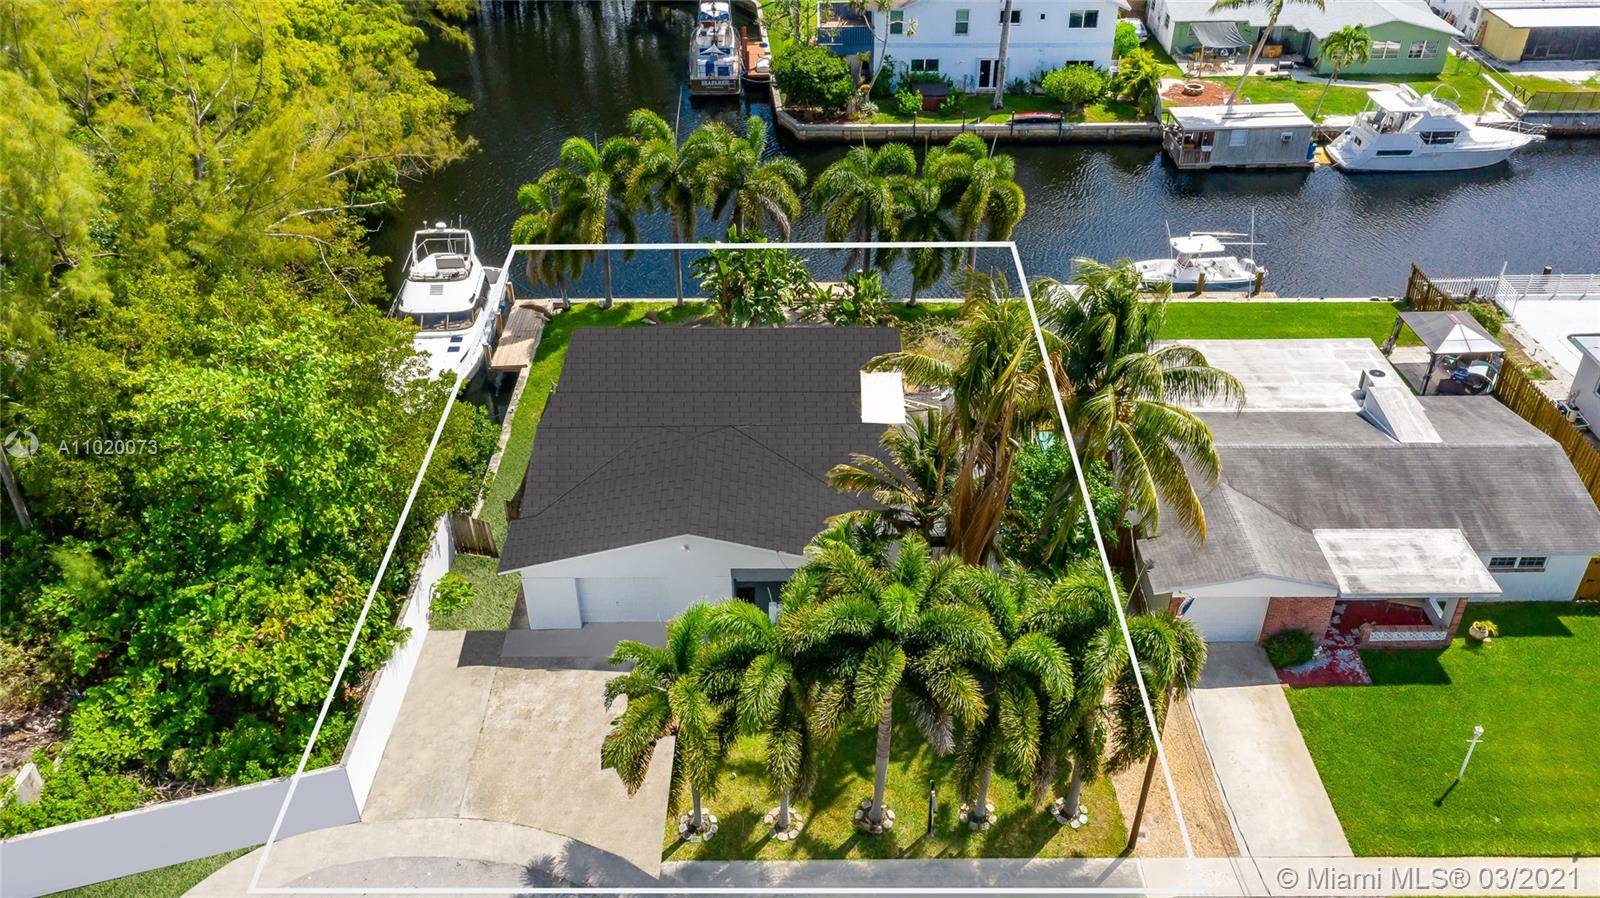 BOATER'S DELIGHT ! Bright and spacious 3 bedroom, 2 bath pool home on quiet cul de sac in Dania Beach.